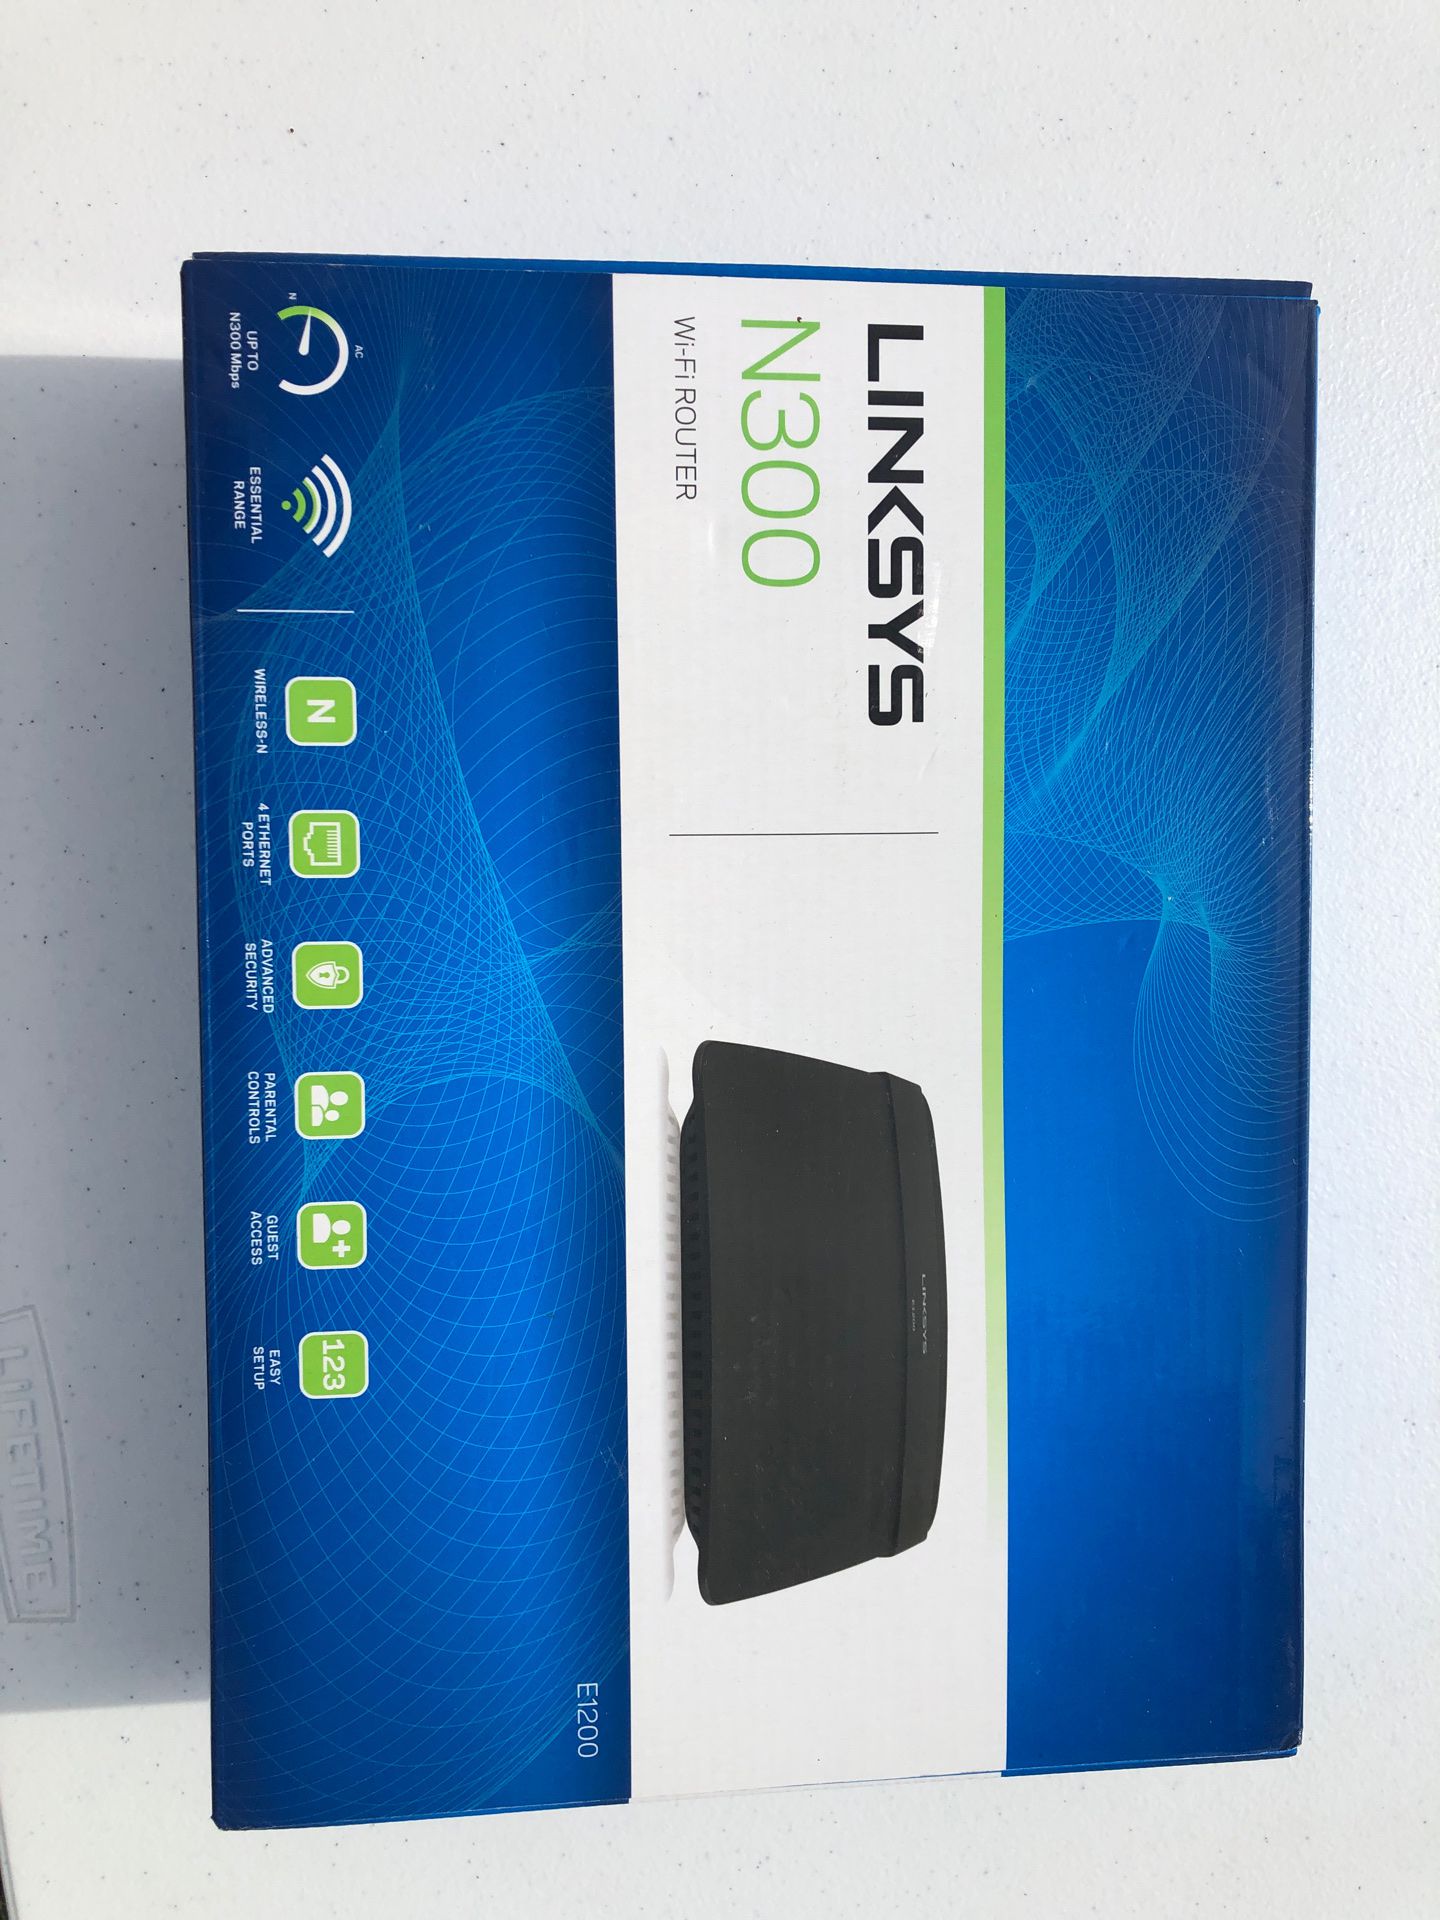 Linksys N300 Wi-Fi Router